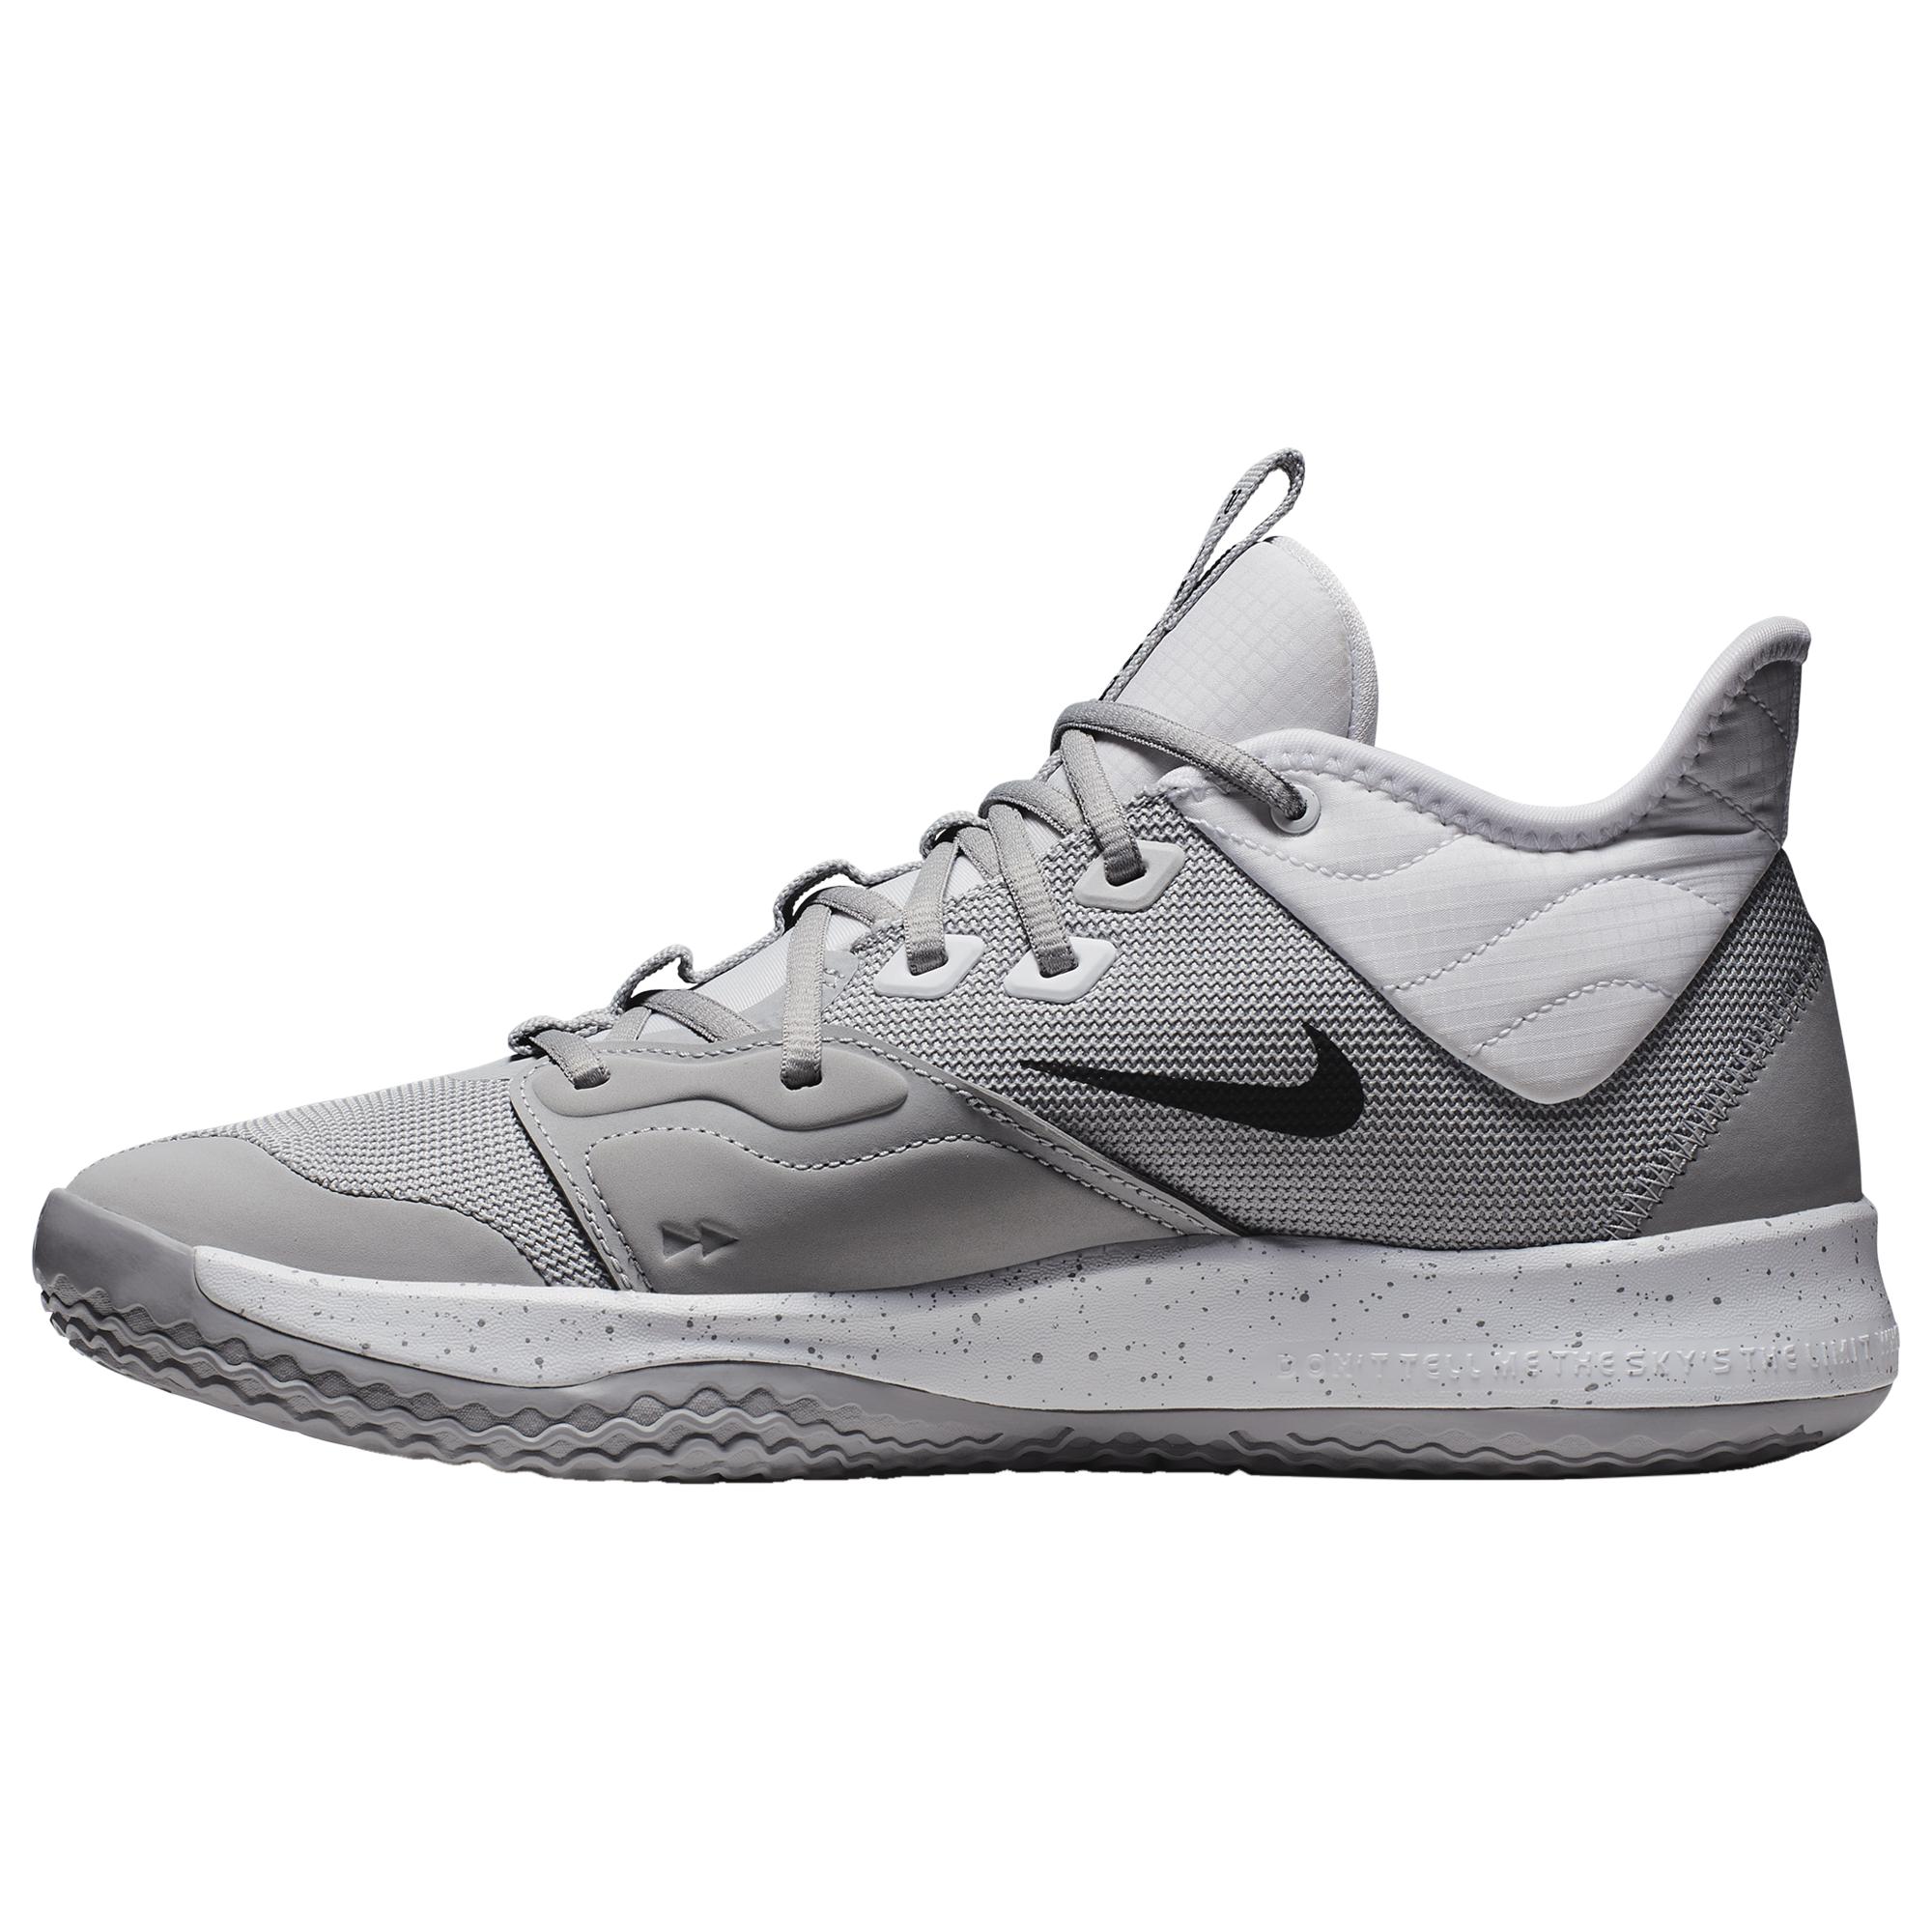 Nike Synthetic Paul George Pg 3 - Basketball Shoes in Grey/Black (Gray) -  Lyst